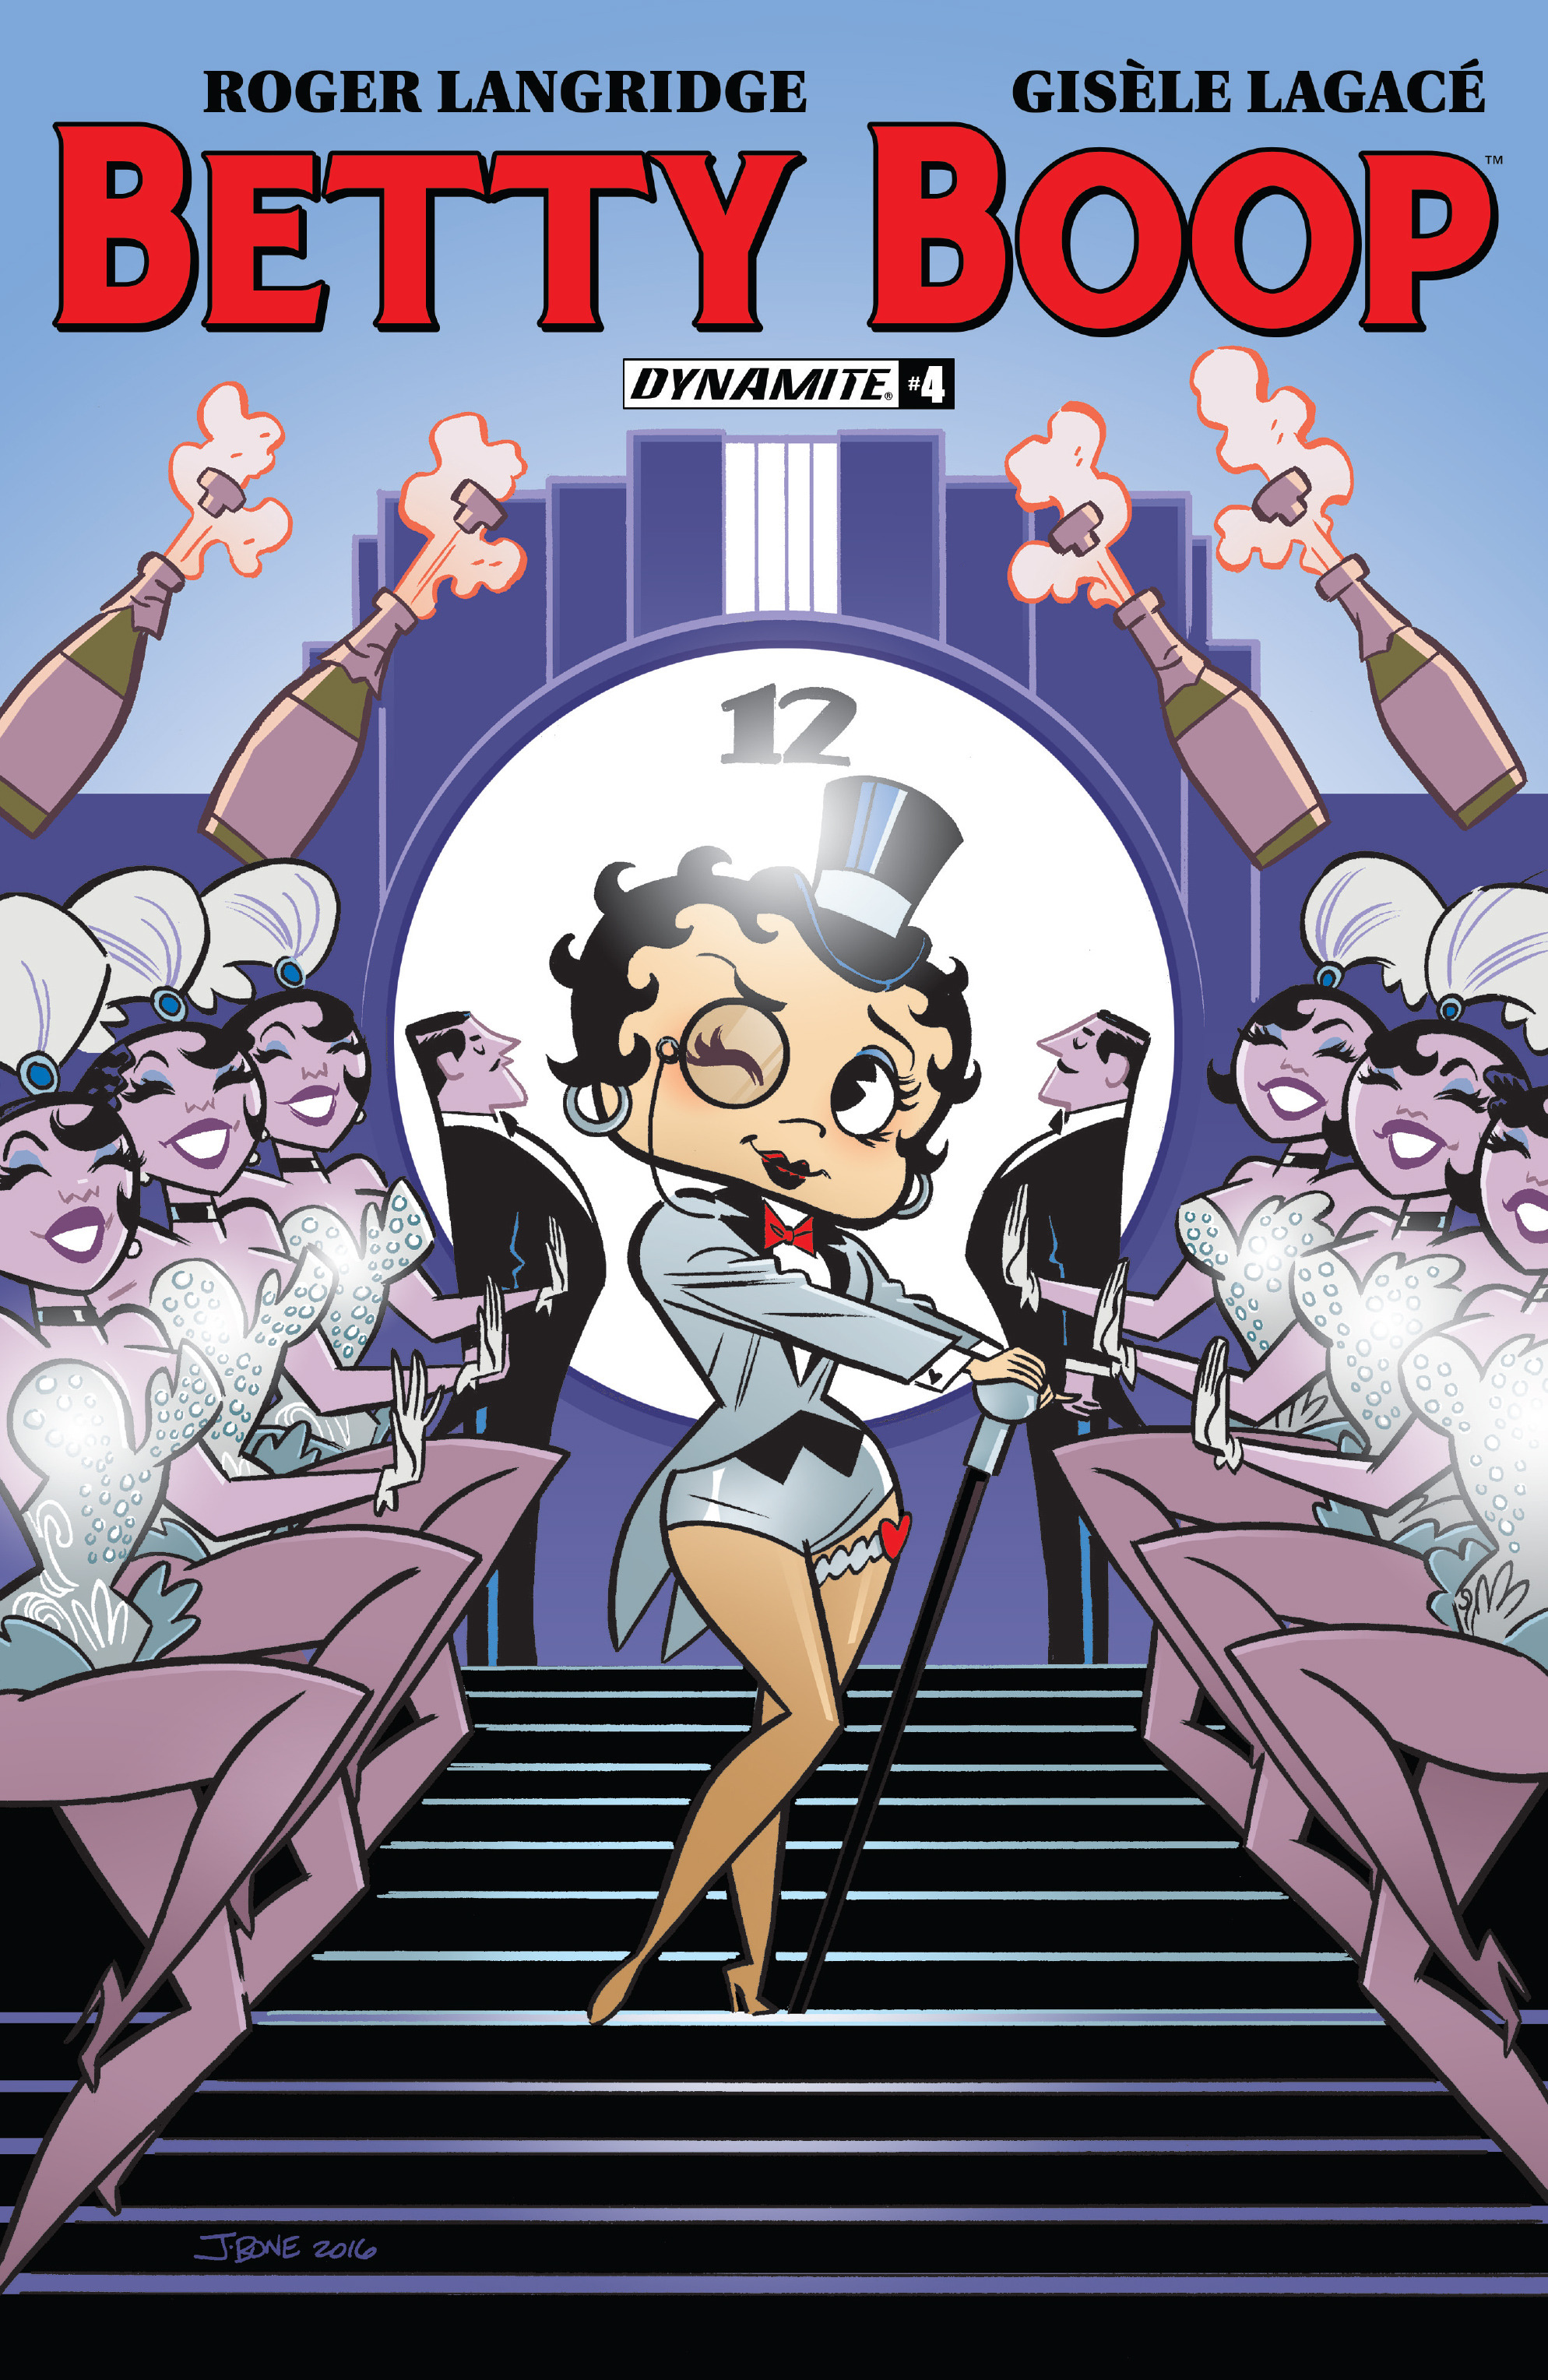 Read online Betty Boop comic -  Issue #4 - 2